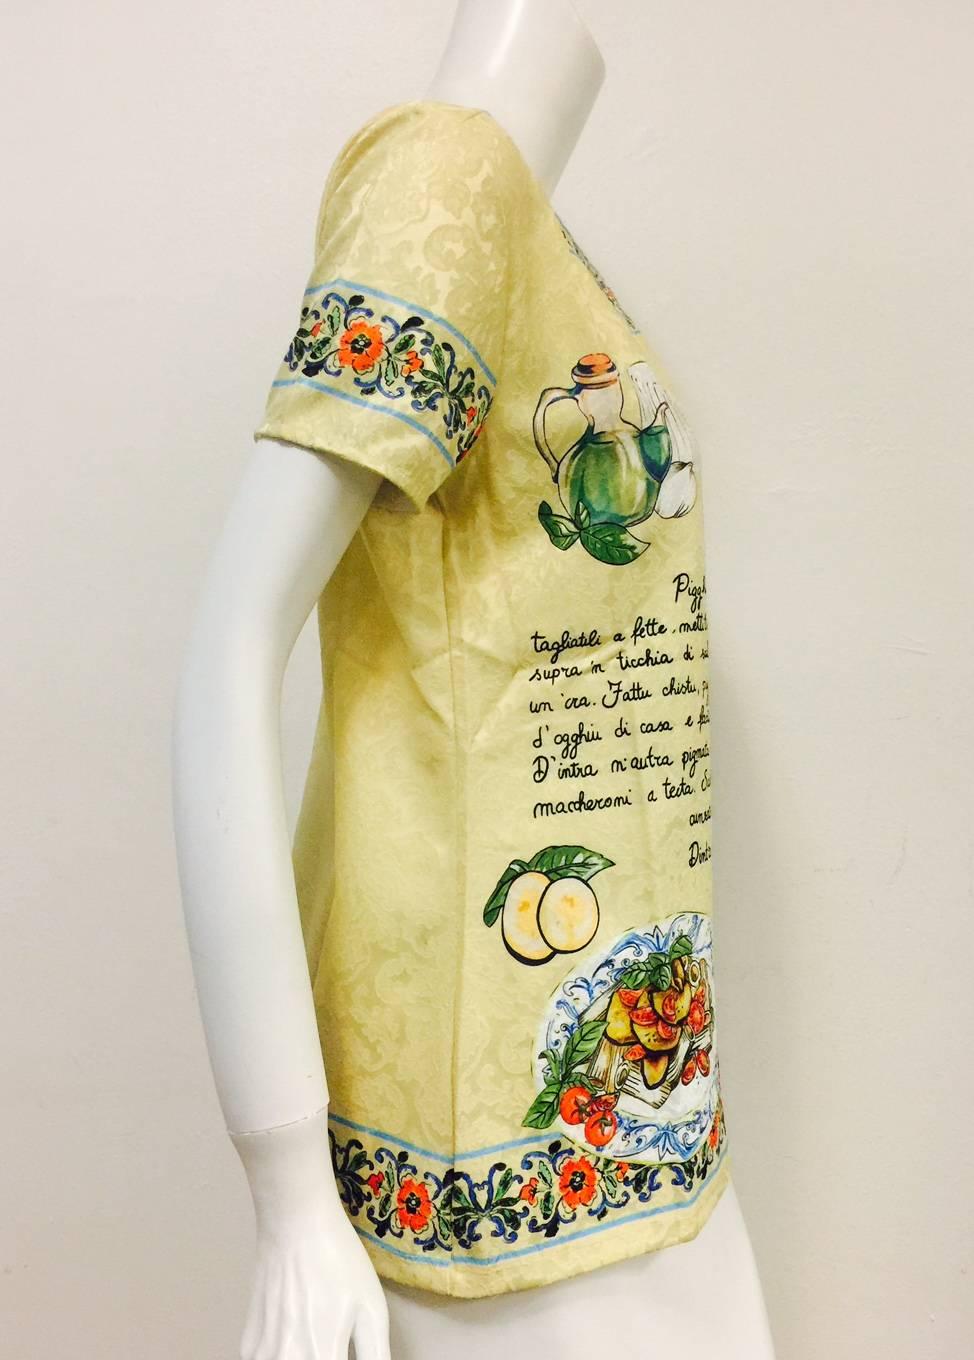 It's no secret that the "Dynamic Duo" of Italian fashion, Domenico Dolce and Stephano Gabbana, love pasta!  so much so that they emblazoned an age-old, detailed recipe for Pasta alla Norma on this exquisite polyamide brocade short sleeve